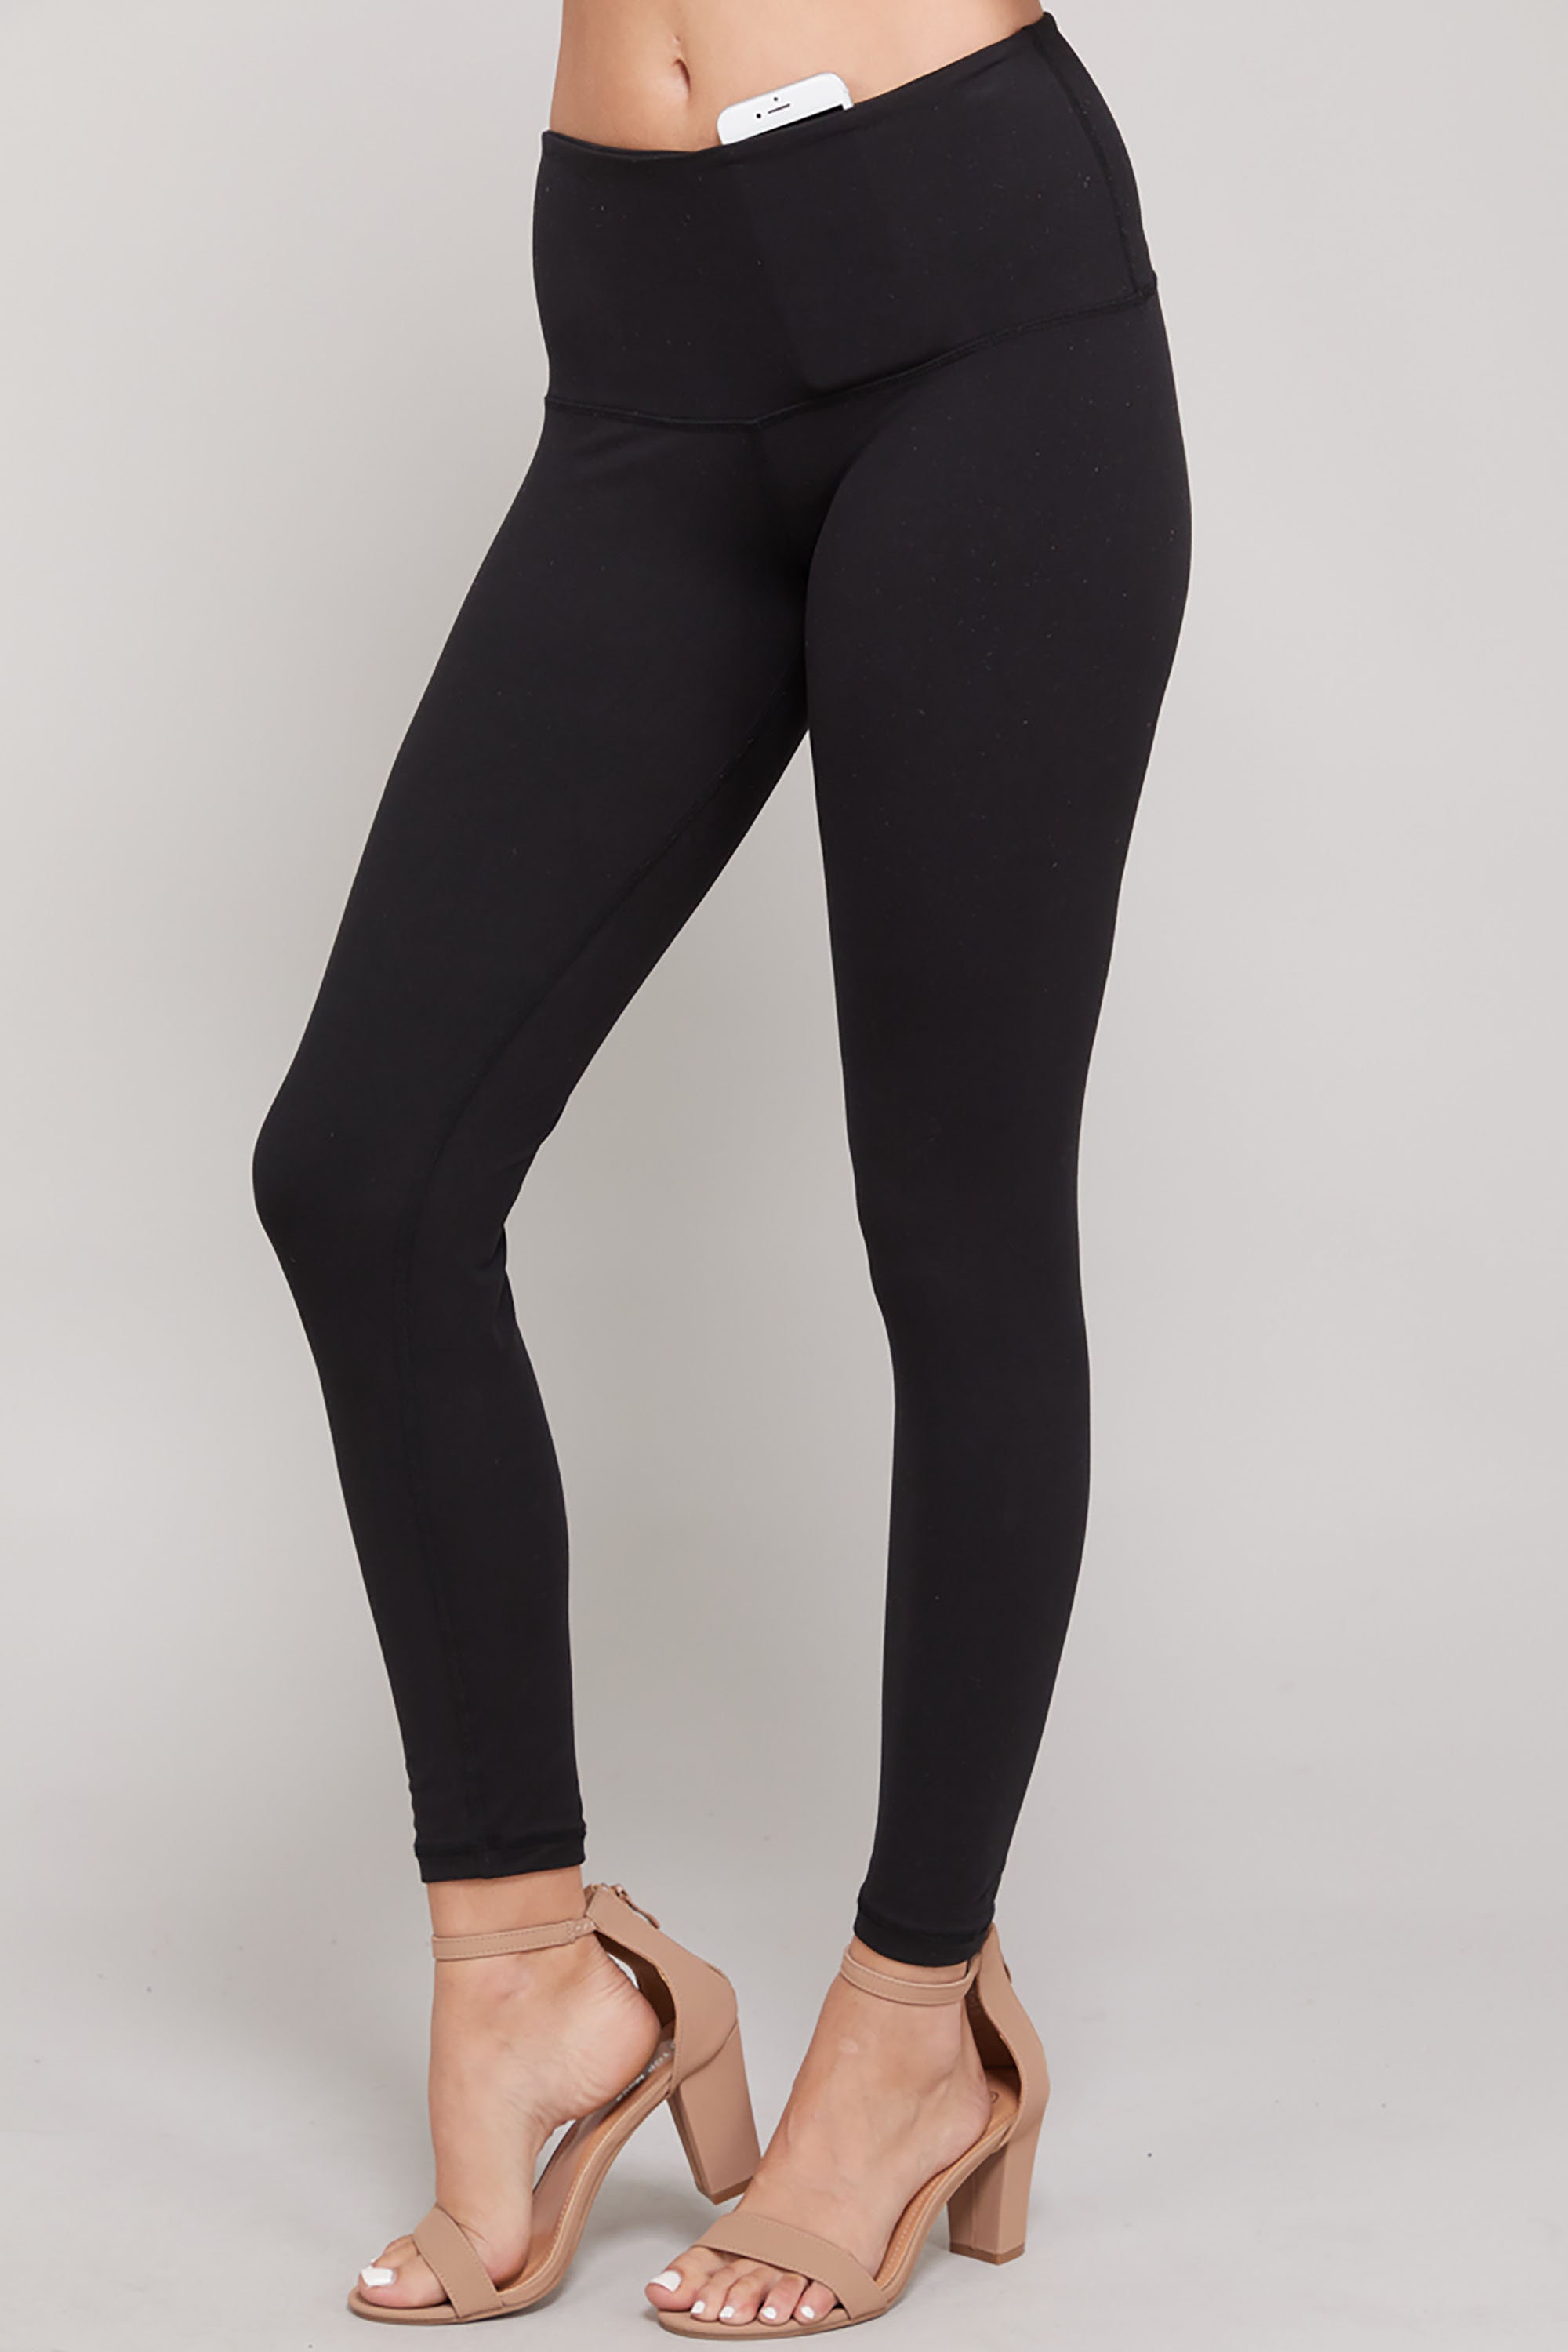 Womens Butter Leggings with Side Pockets Athleisurewear Wide Waist Active  Leisurewear Size S - 3X (Small, Black) at  Women's Clothing store